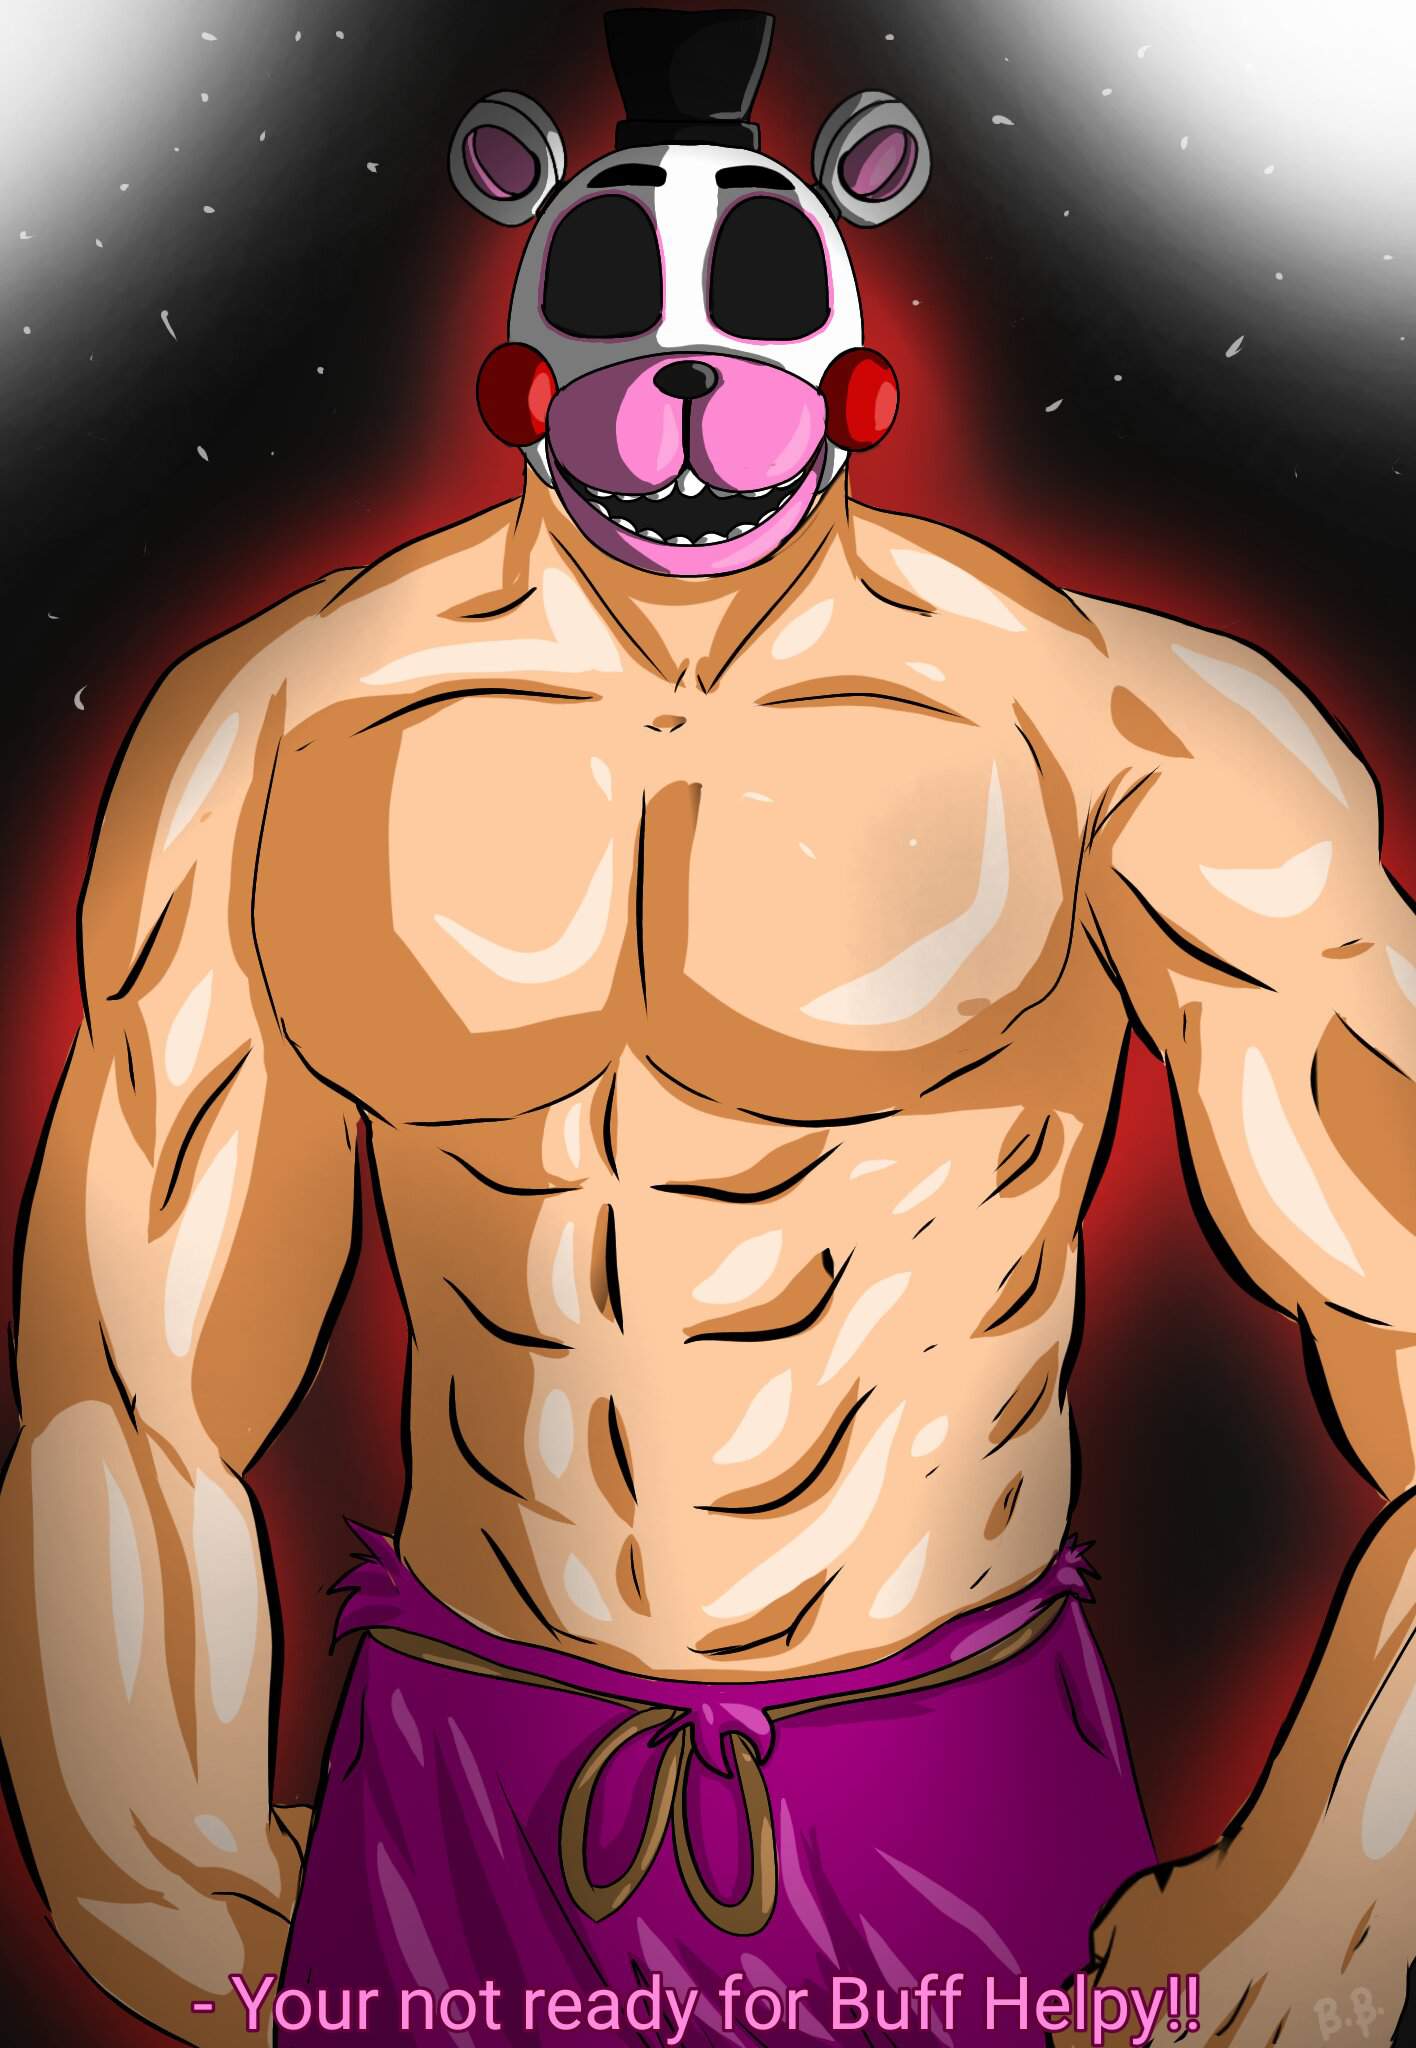 BUFF HELPY ON THE HOUSE! (i have sinned) Five Nights At Freddy's Amino...